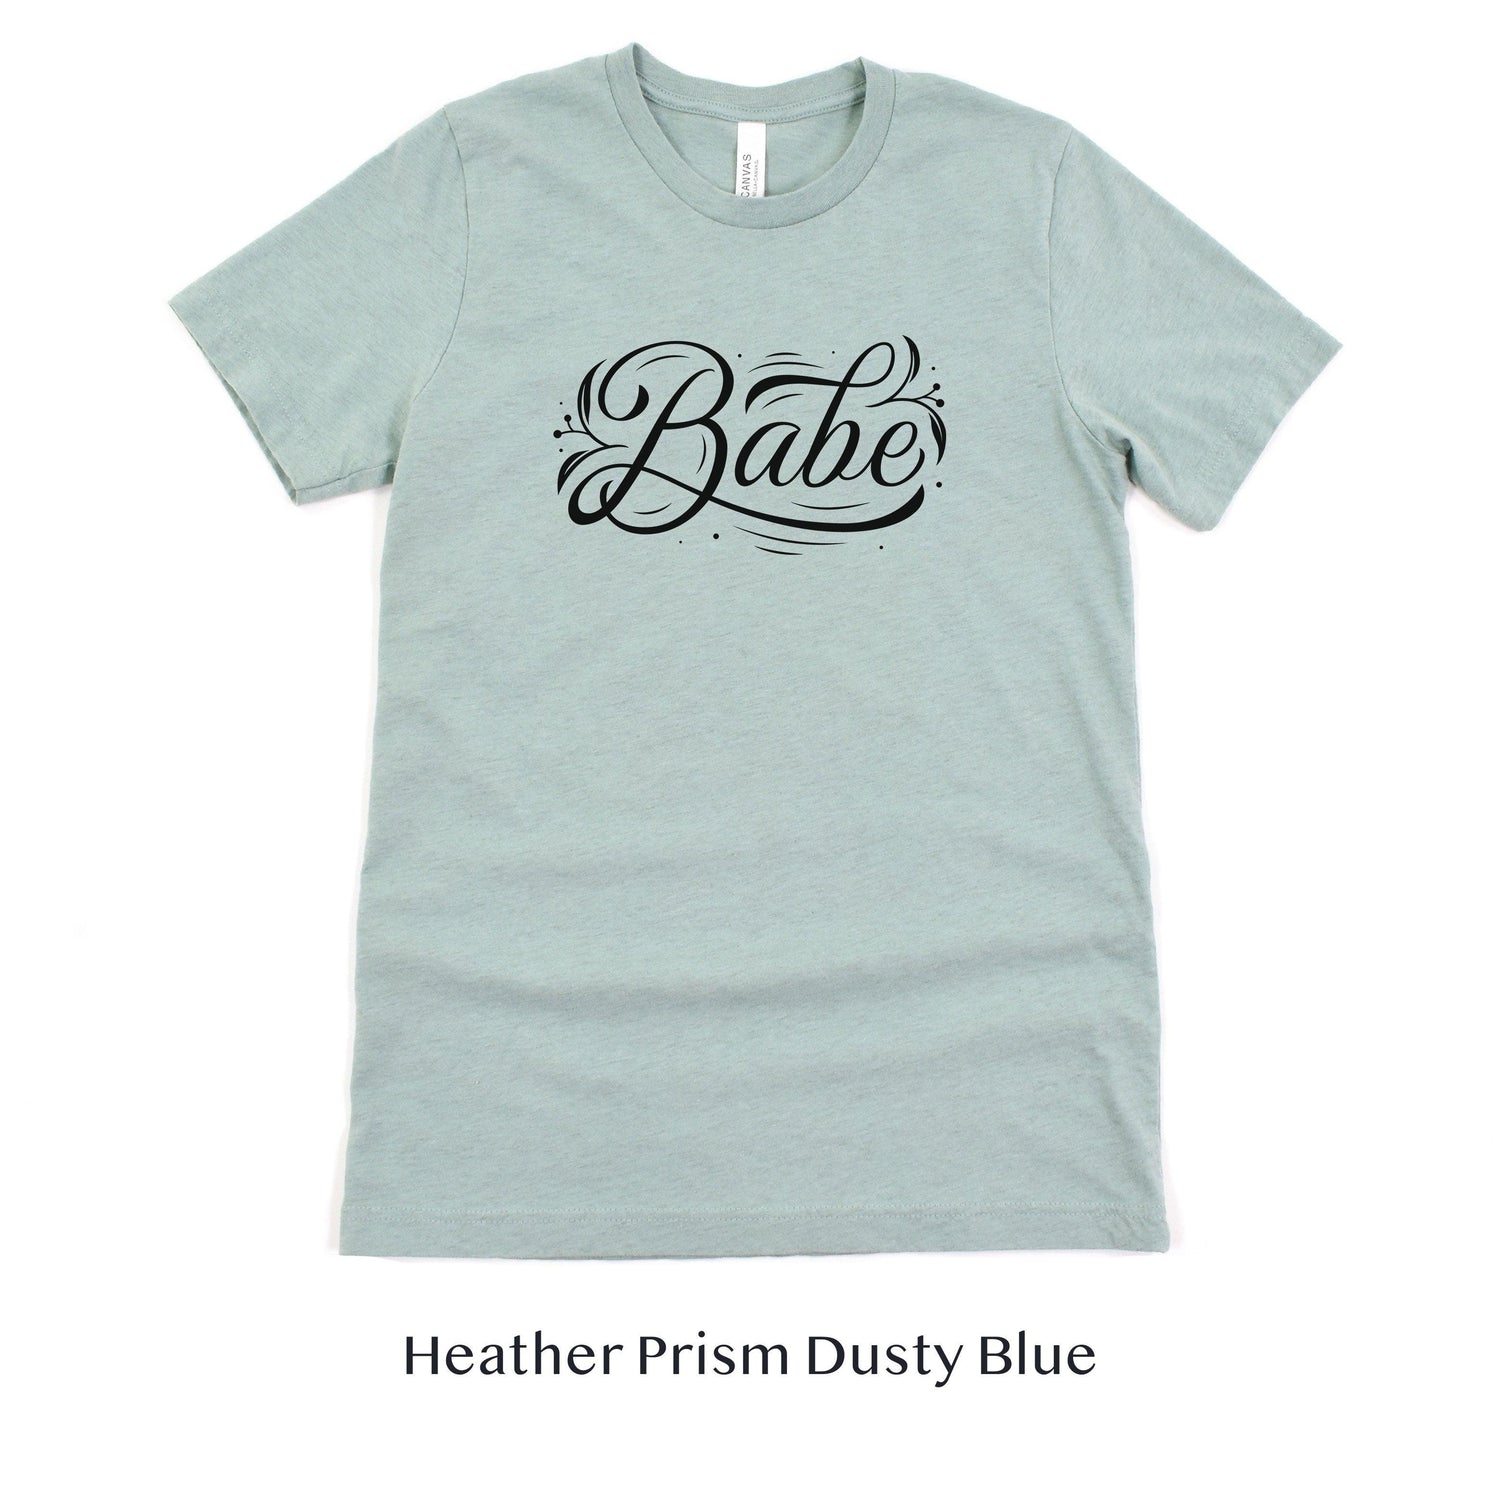 Babe Short-Sleeve Tee - Bach Weekend and Bridal Proposal Box Shirt - Plus Sizes Available by Oaklynn Lane - Dusty Blue Colored Shirt